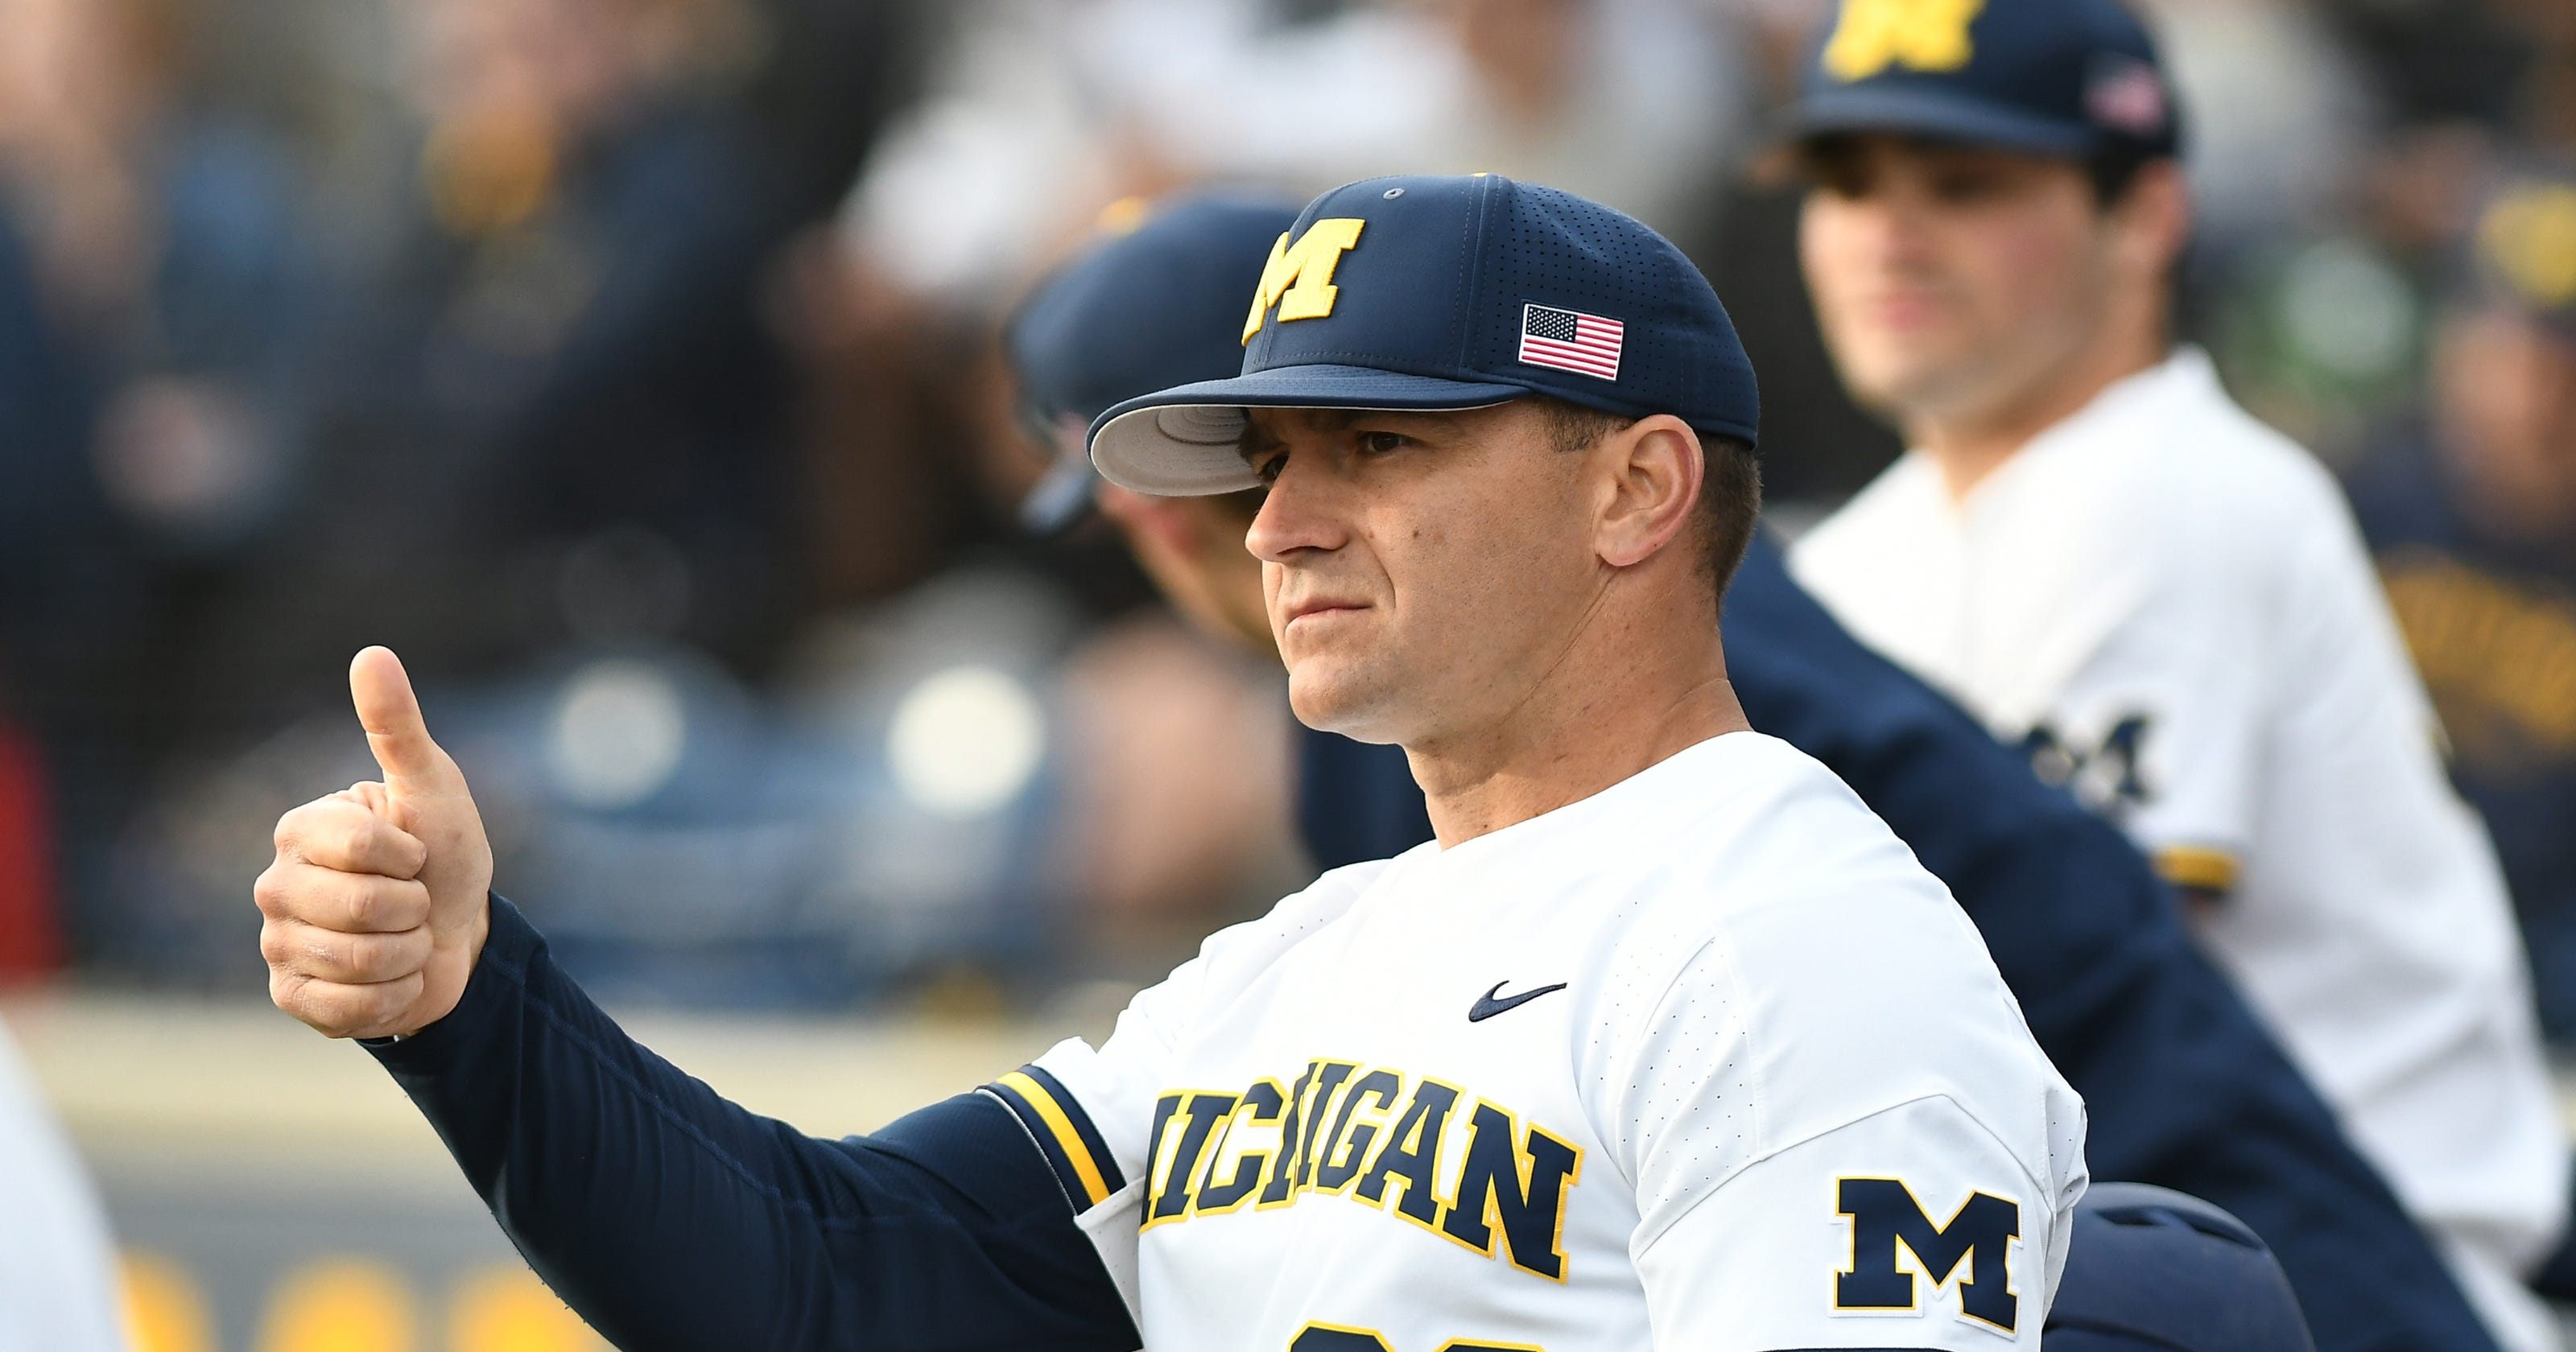 Hours before CWS debut, Michigan's Erik Bakich named college baseball coach of the year